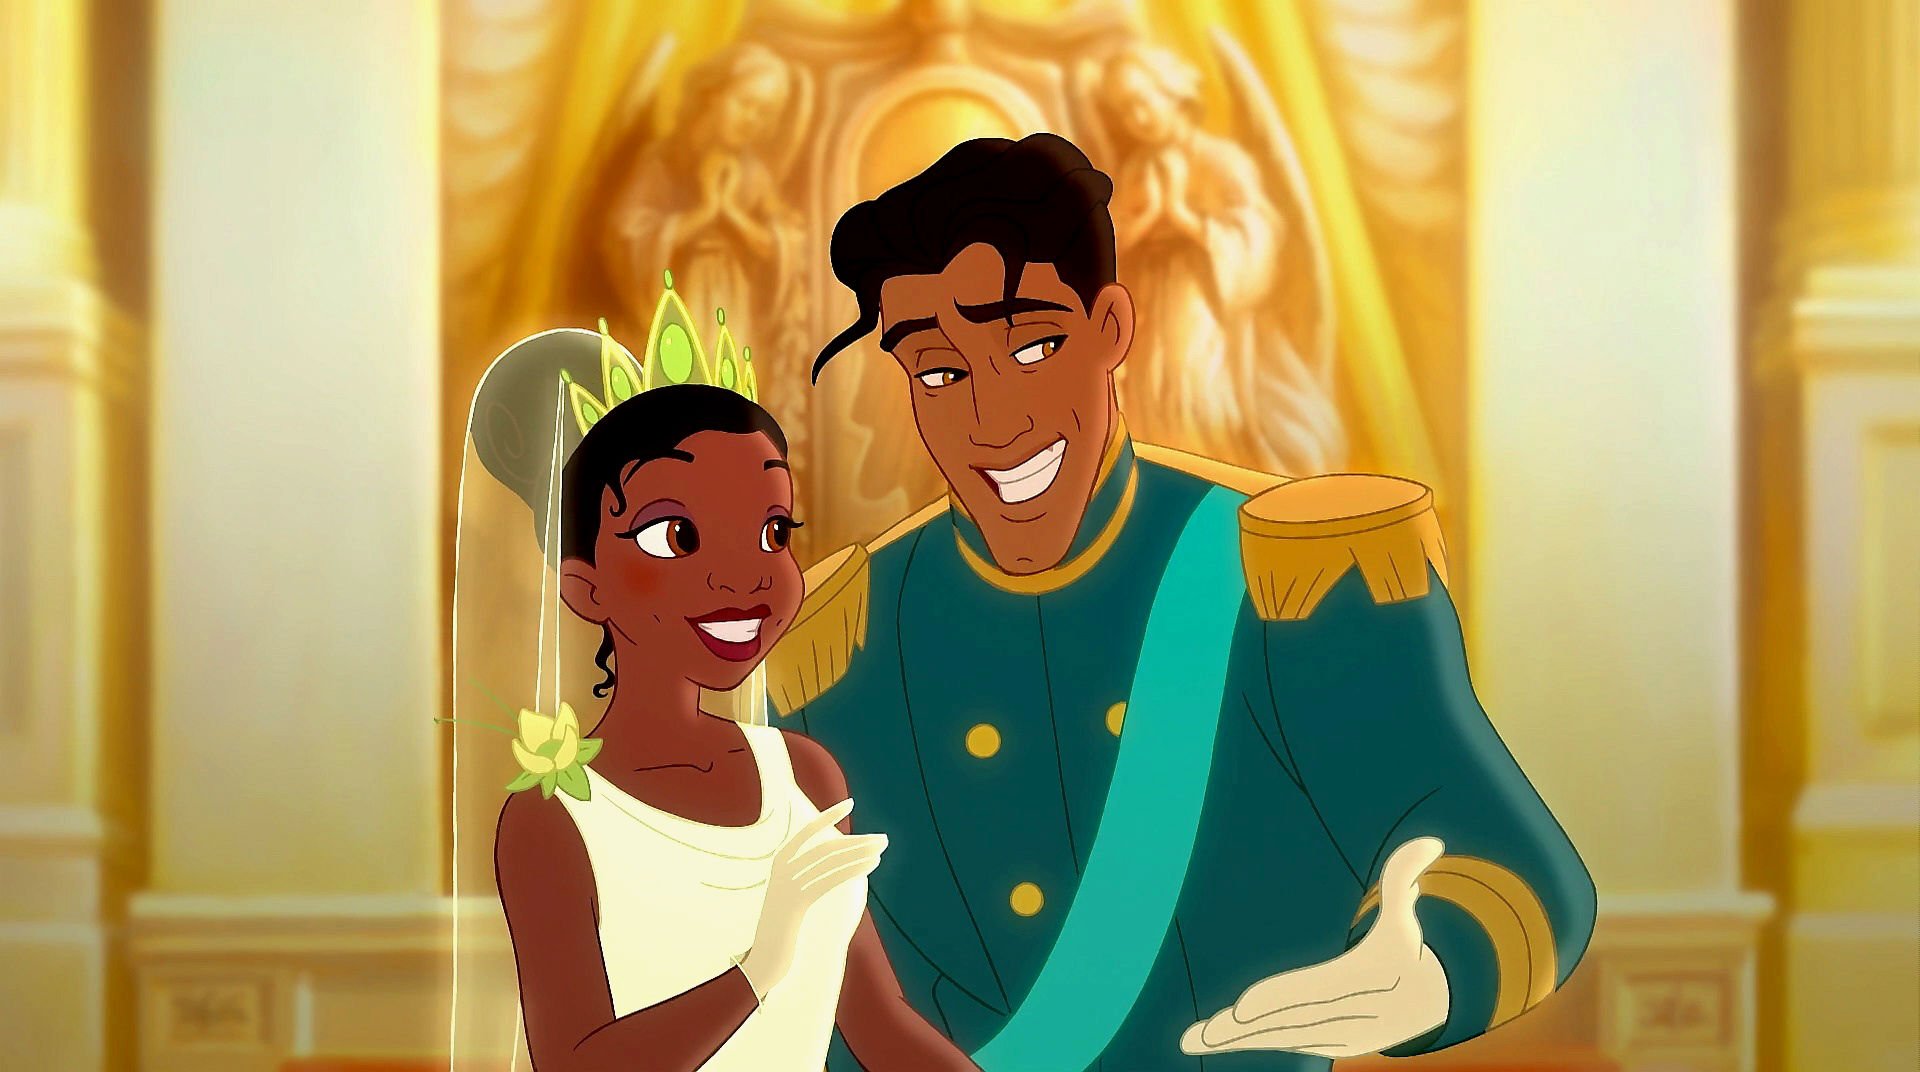 Prince Naveen from The Princess and the Frog - wide 5